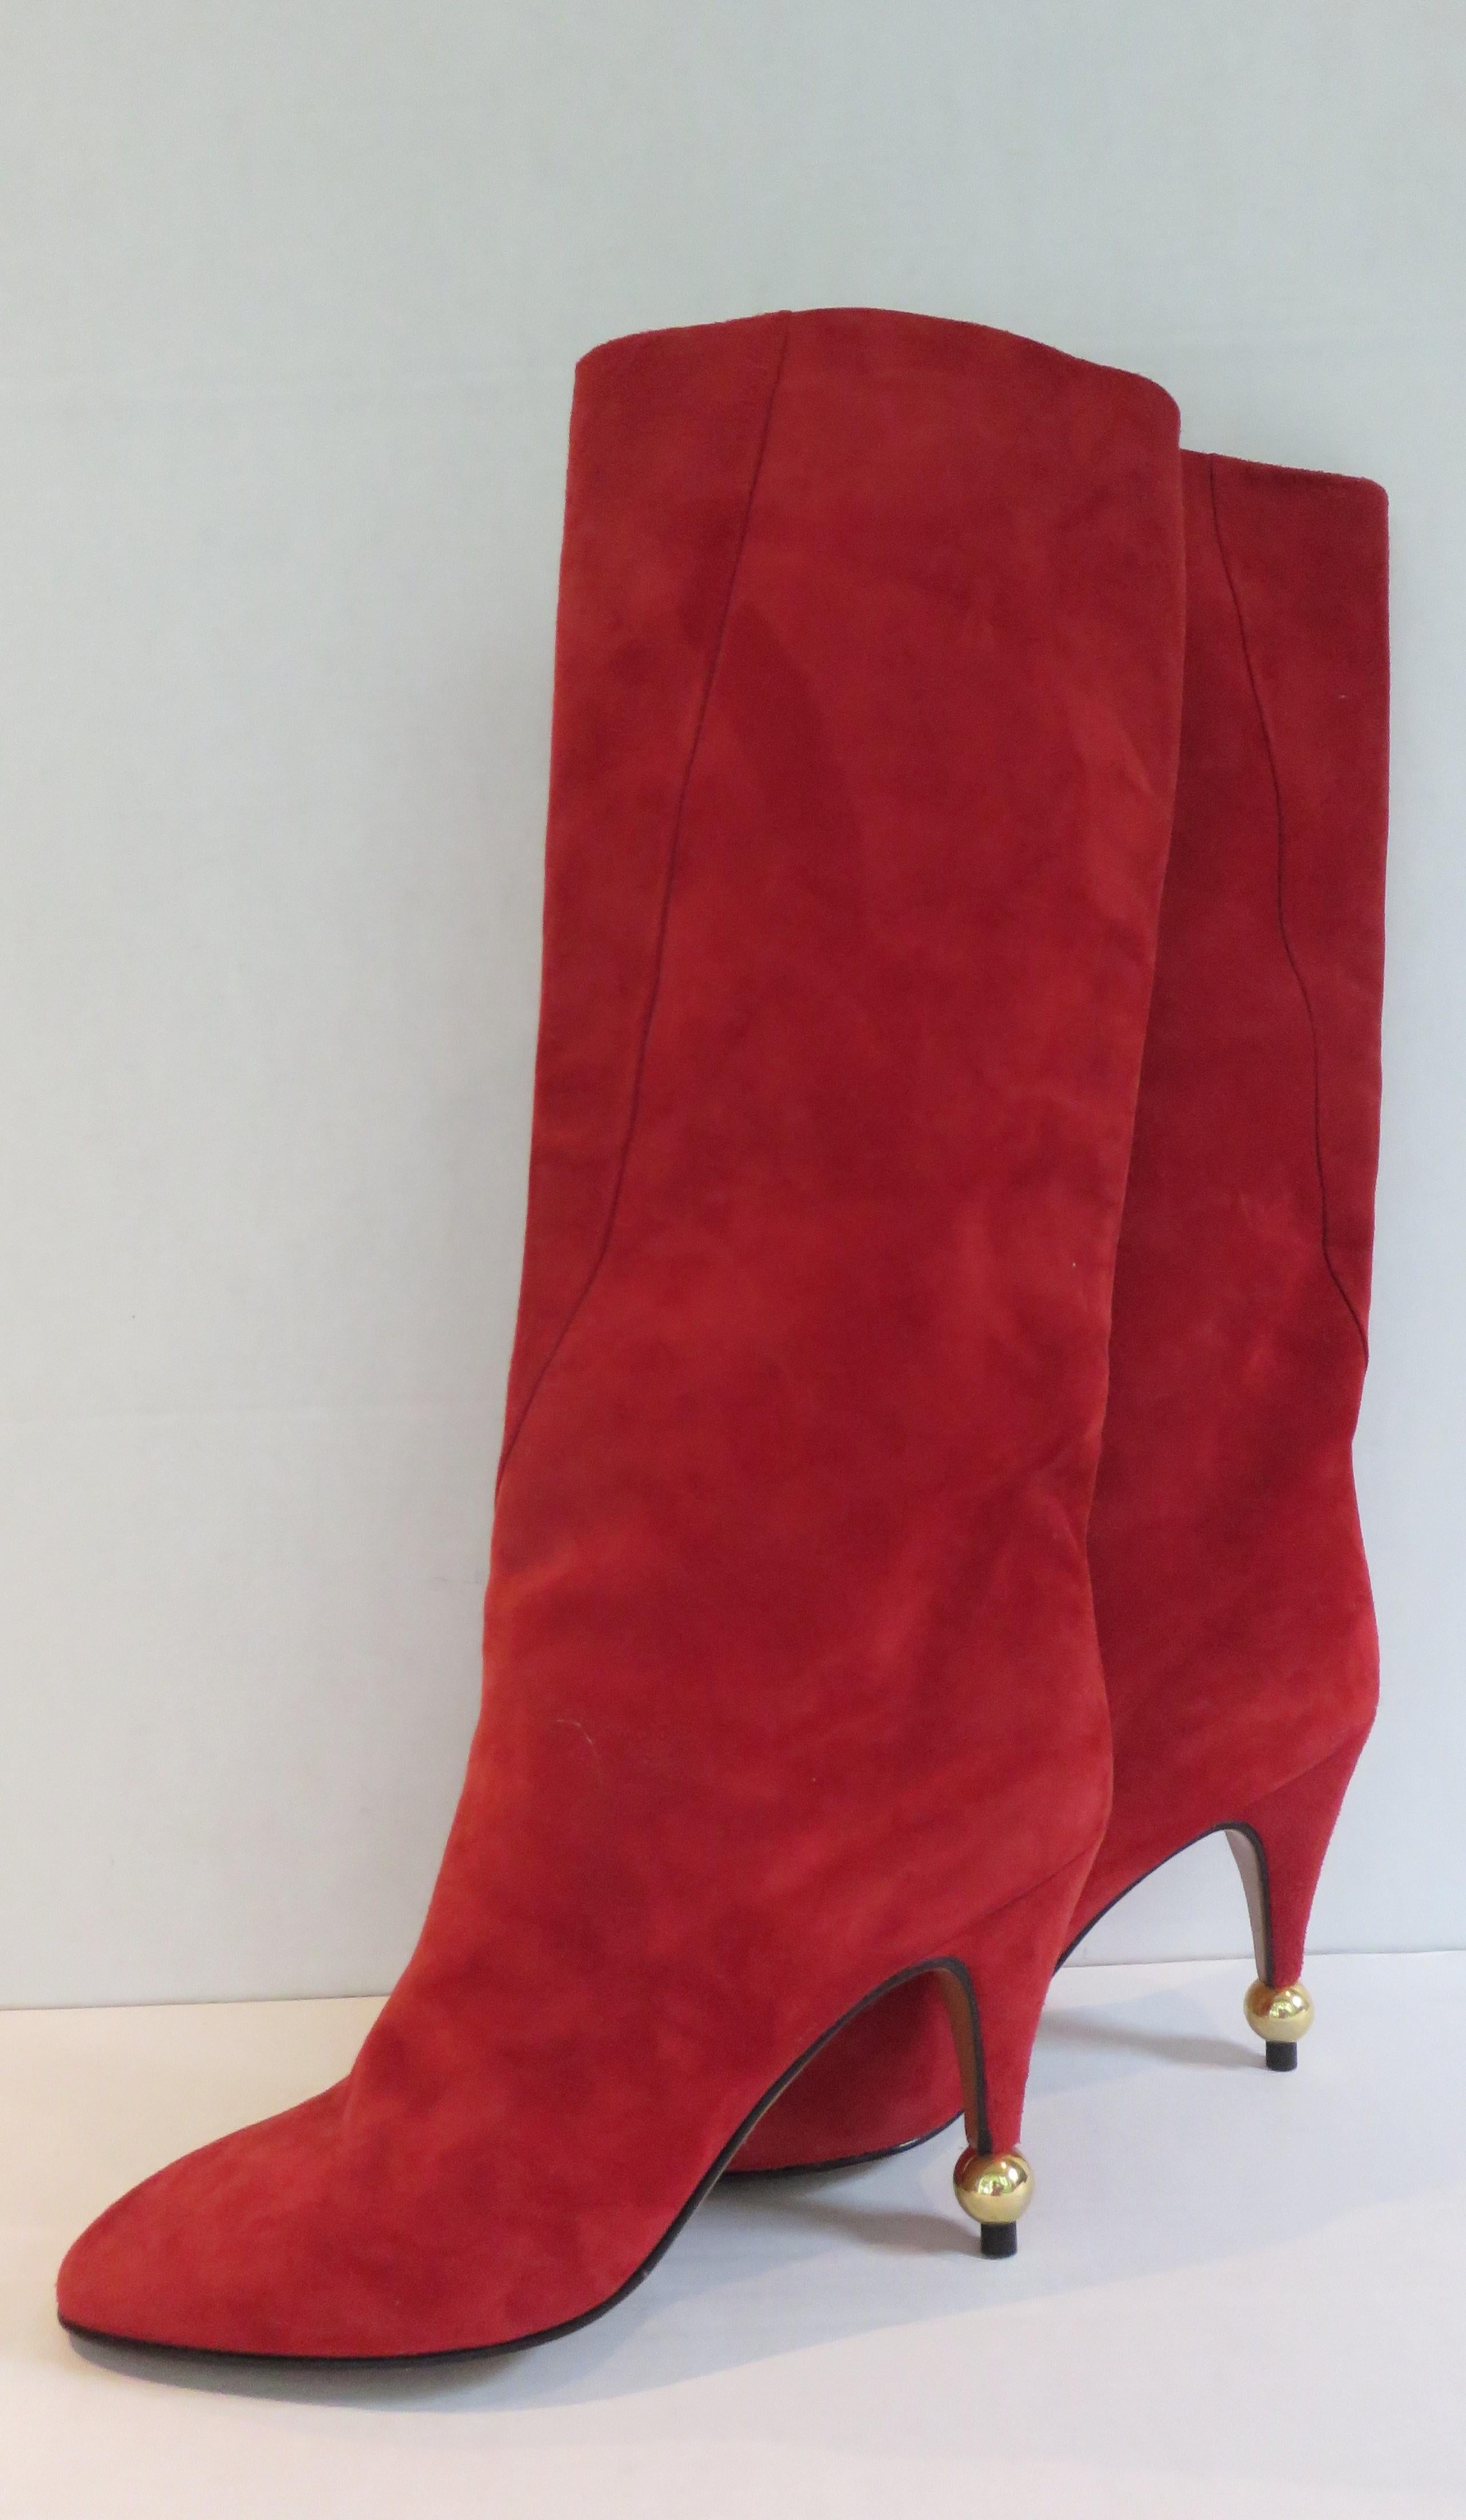 Women's Roger Vivier New Vintage 1980s Suede Ball Heel Boots Size 8 For Sale